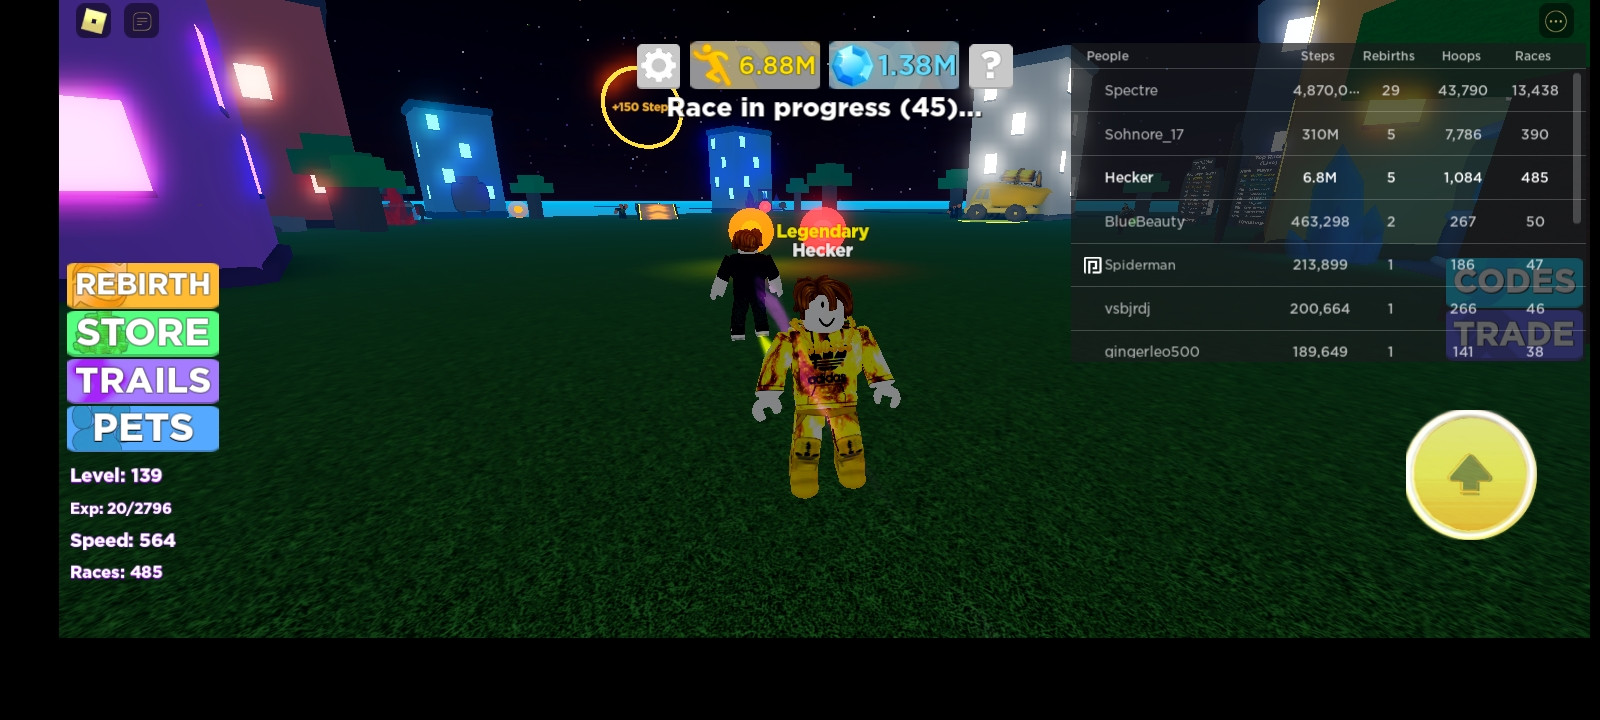 How To Redeem Rogold Ultimate (Roblox) 